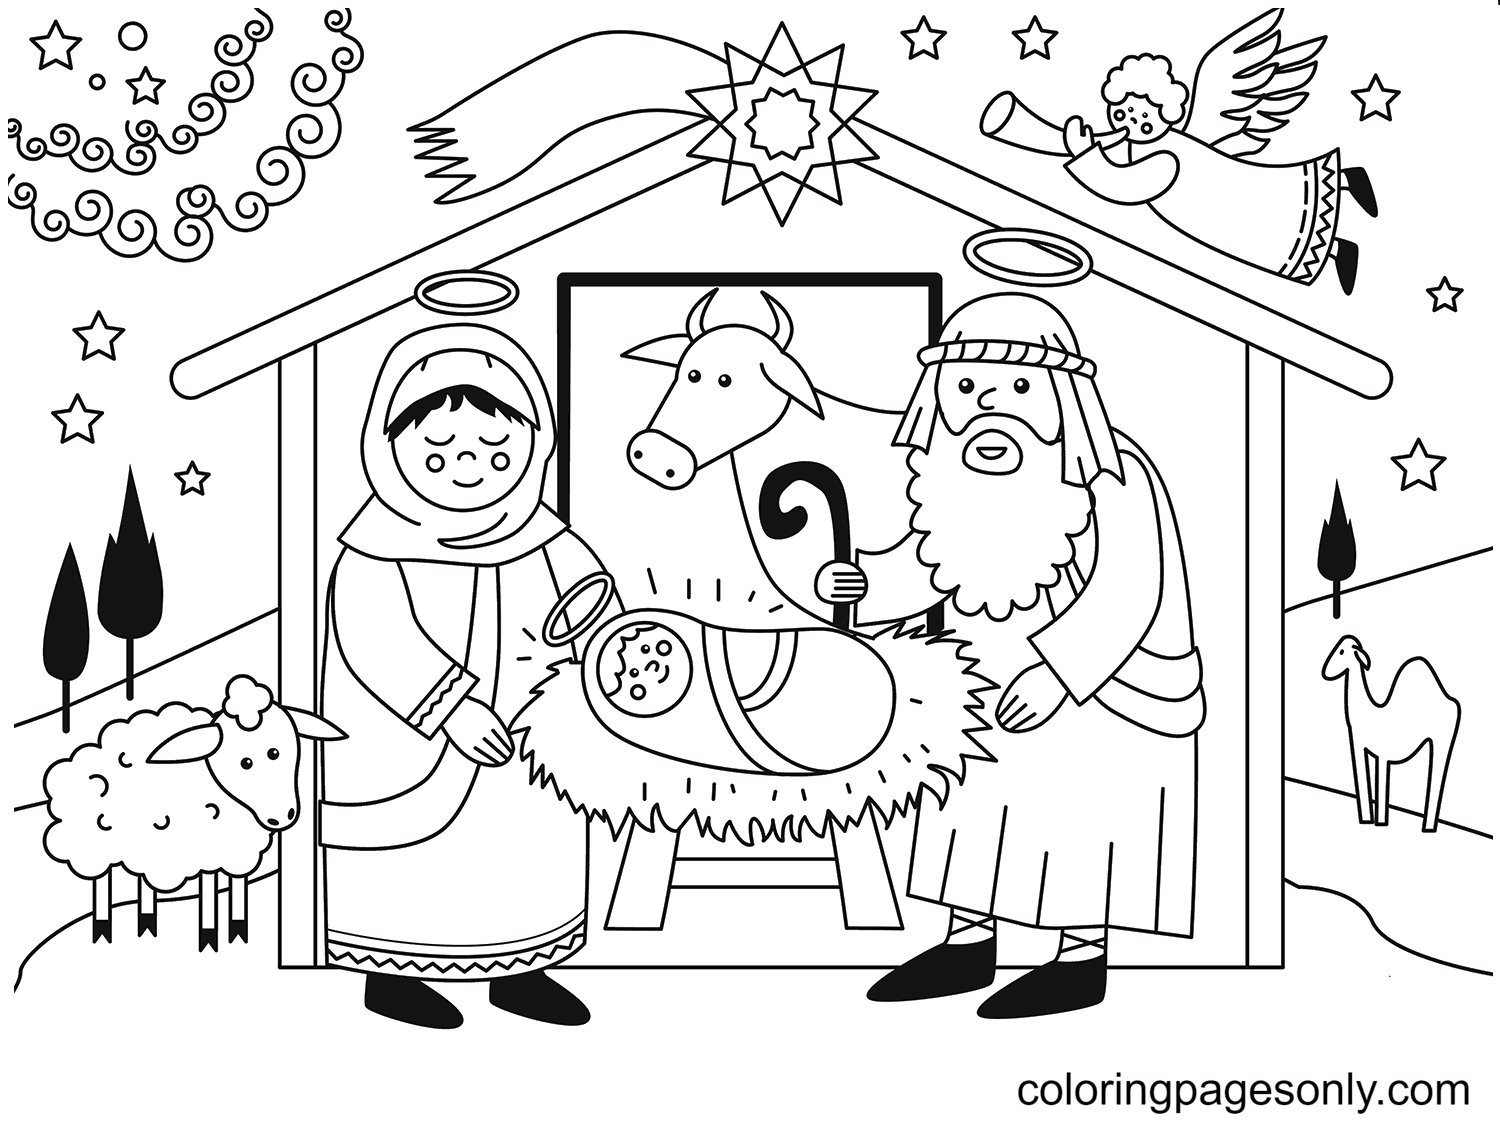 The Birth of Jesus Coloring Page